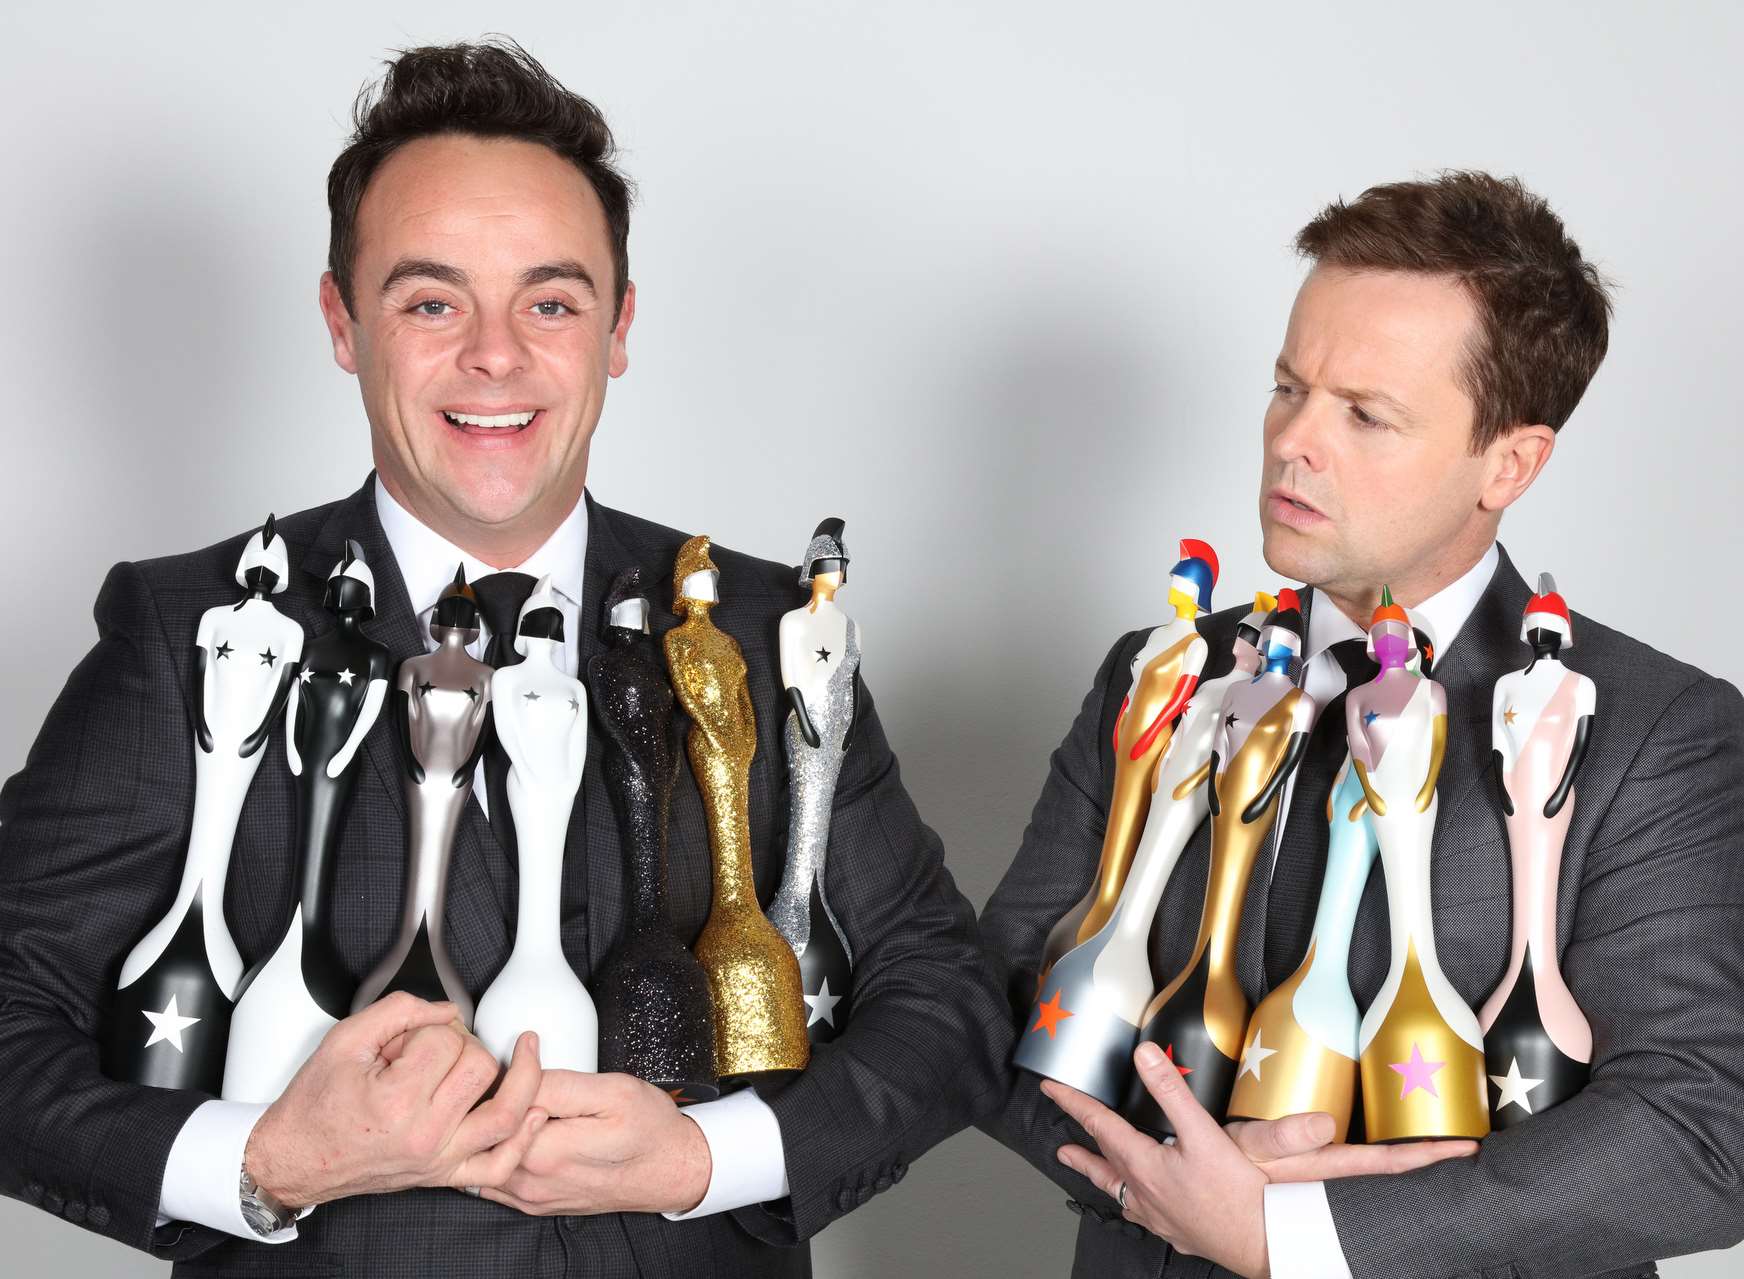 The Brit Awards were hosted by Ant and Dec